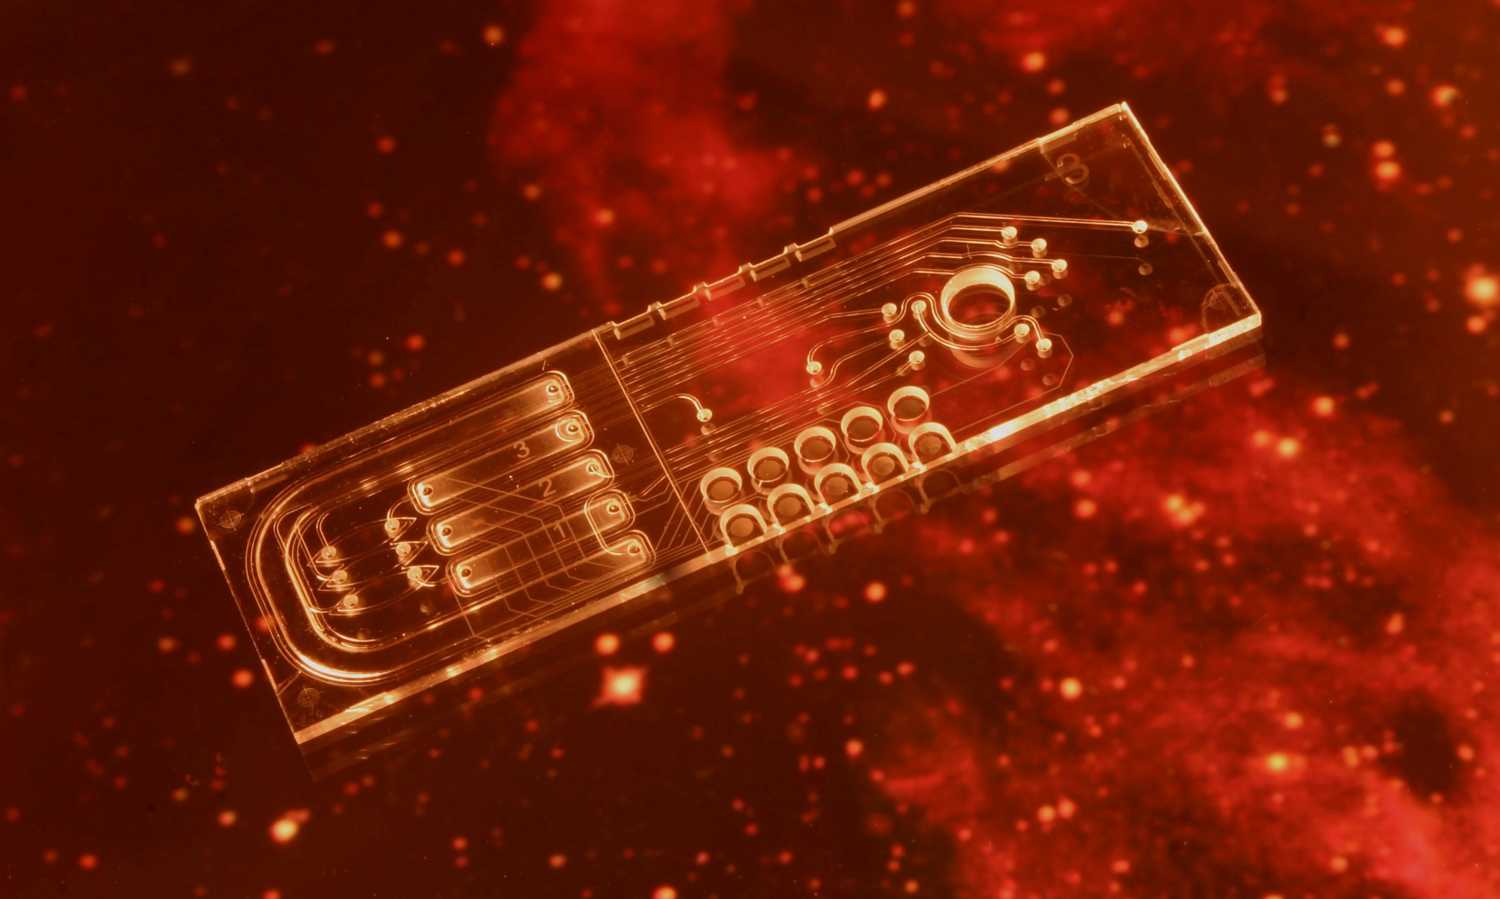 Microfluidic chipmodule in miniaturised micro-array for detection of life on Mars (Life Marker Chip)